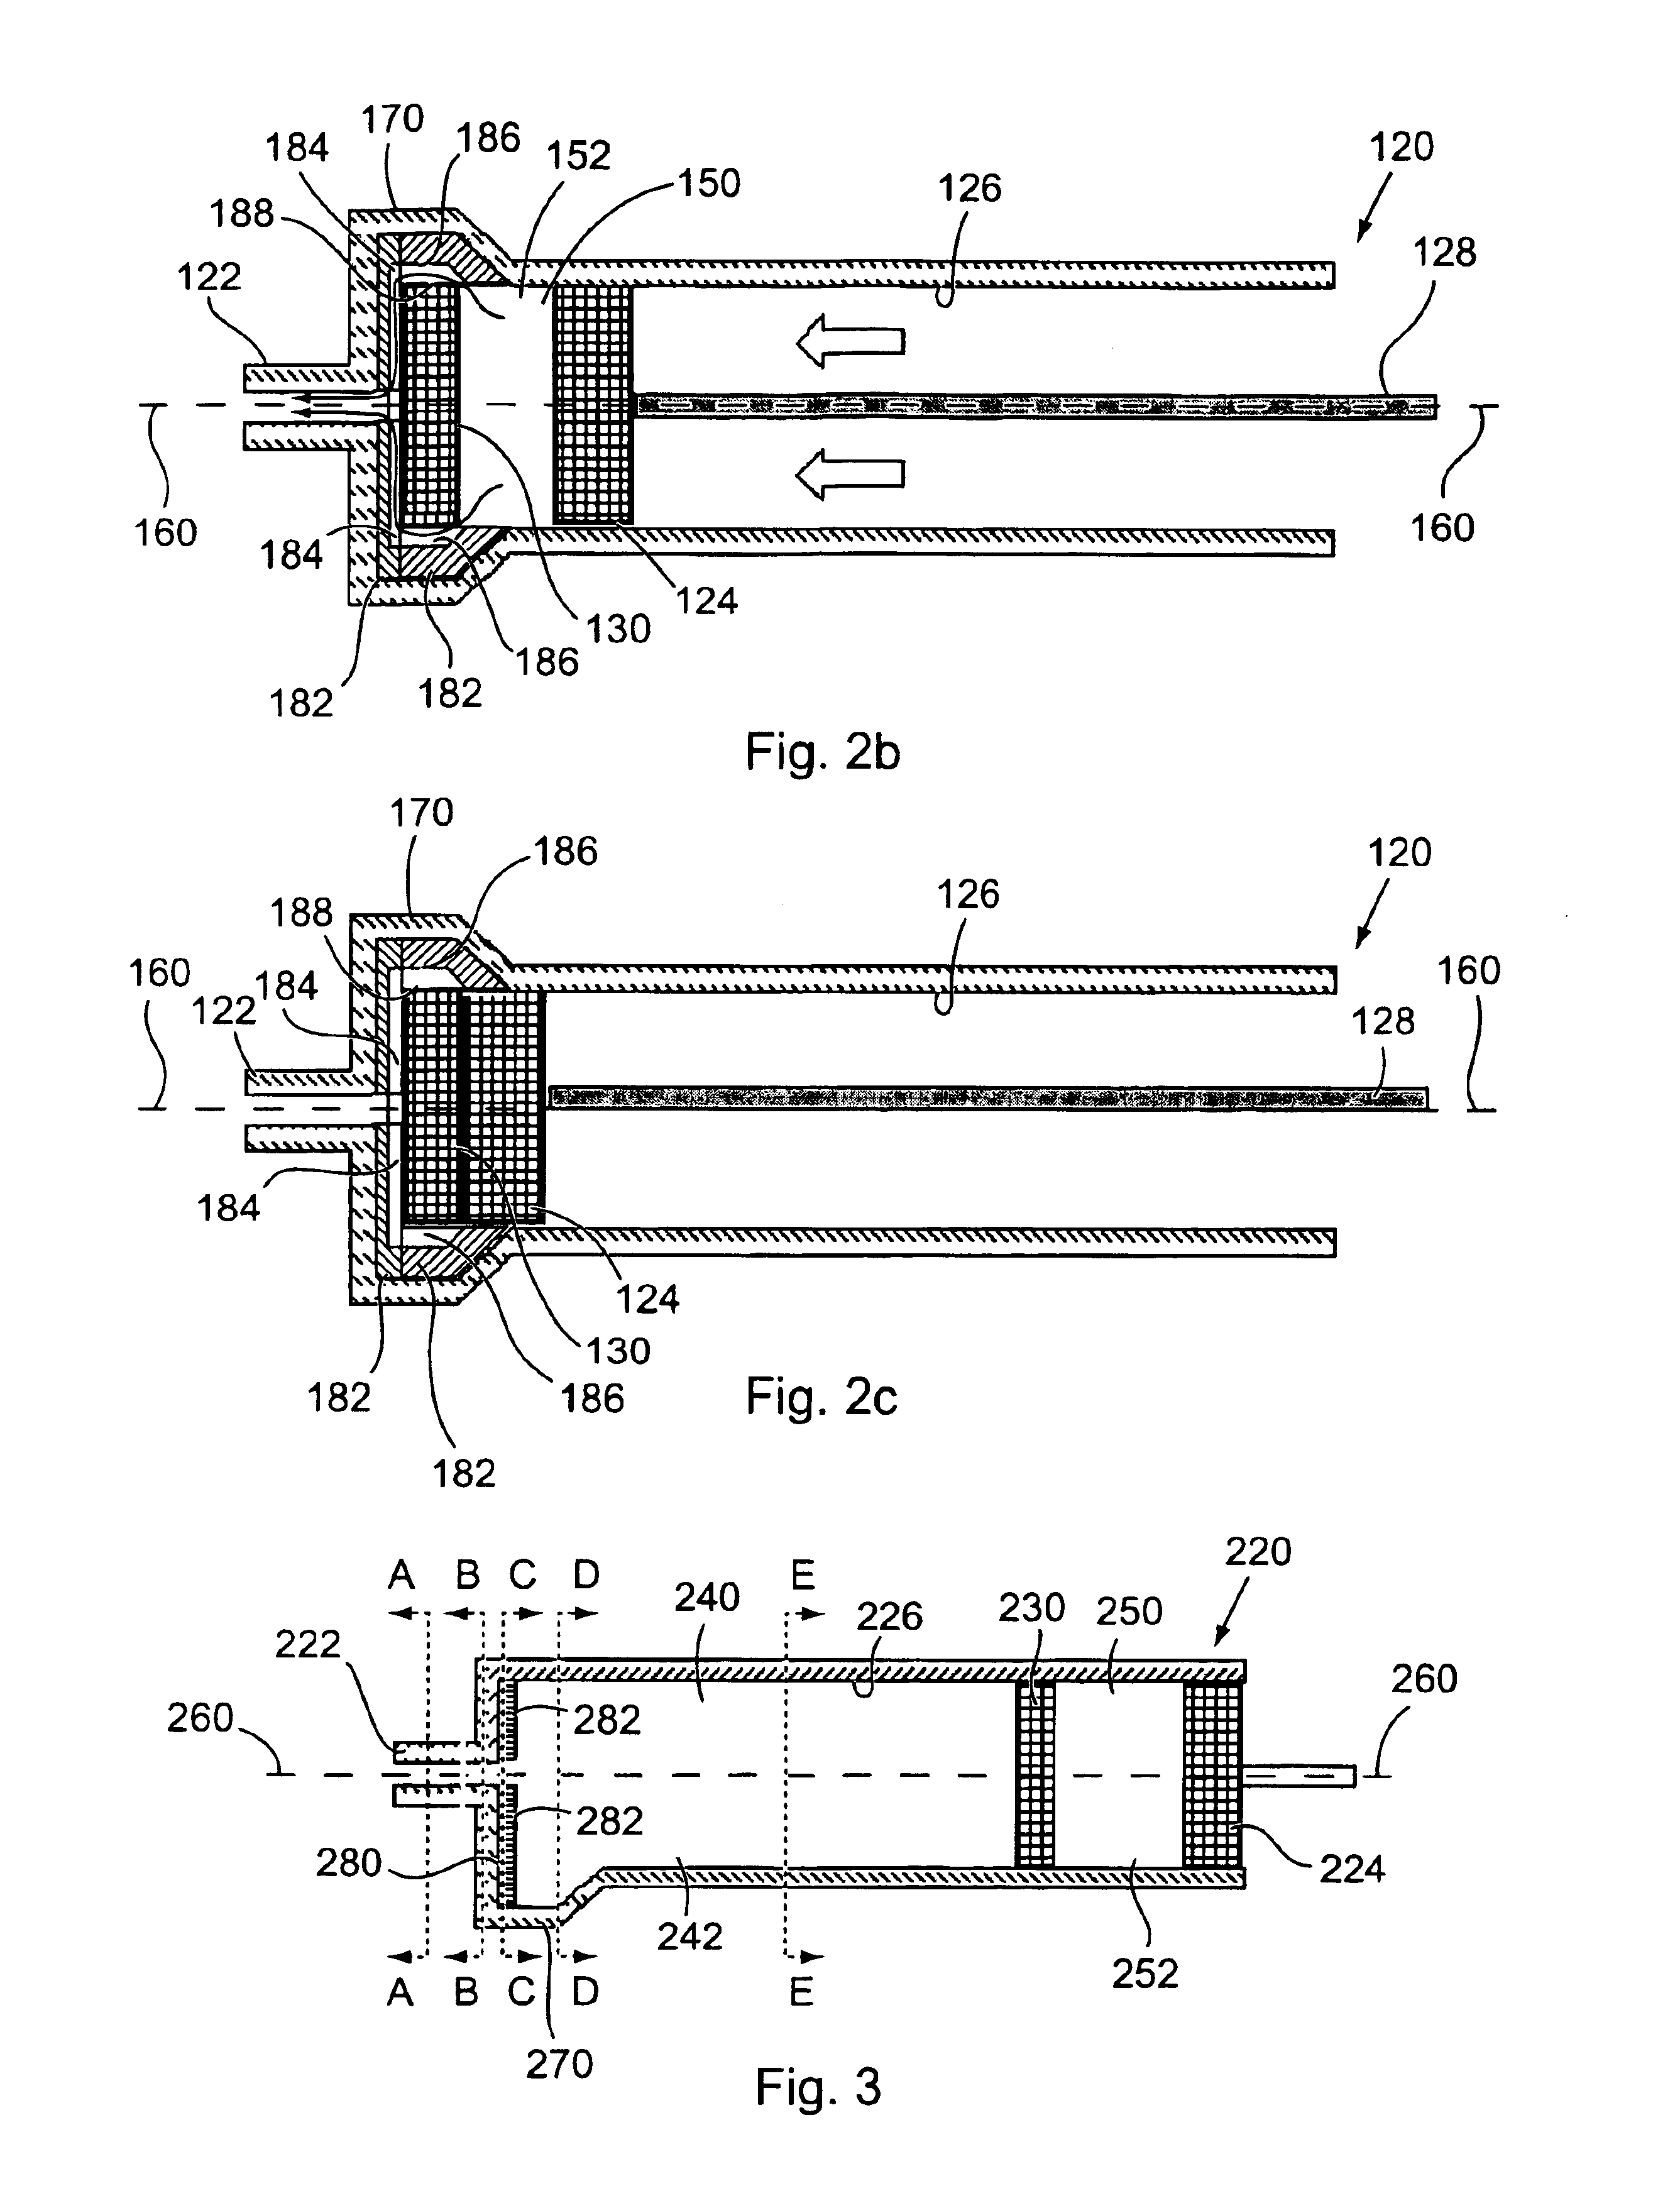 Method and apparatus for sequential delivery of multiple injectable substances stored in a prefilled syringe